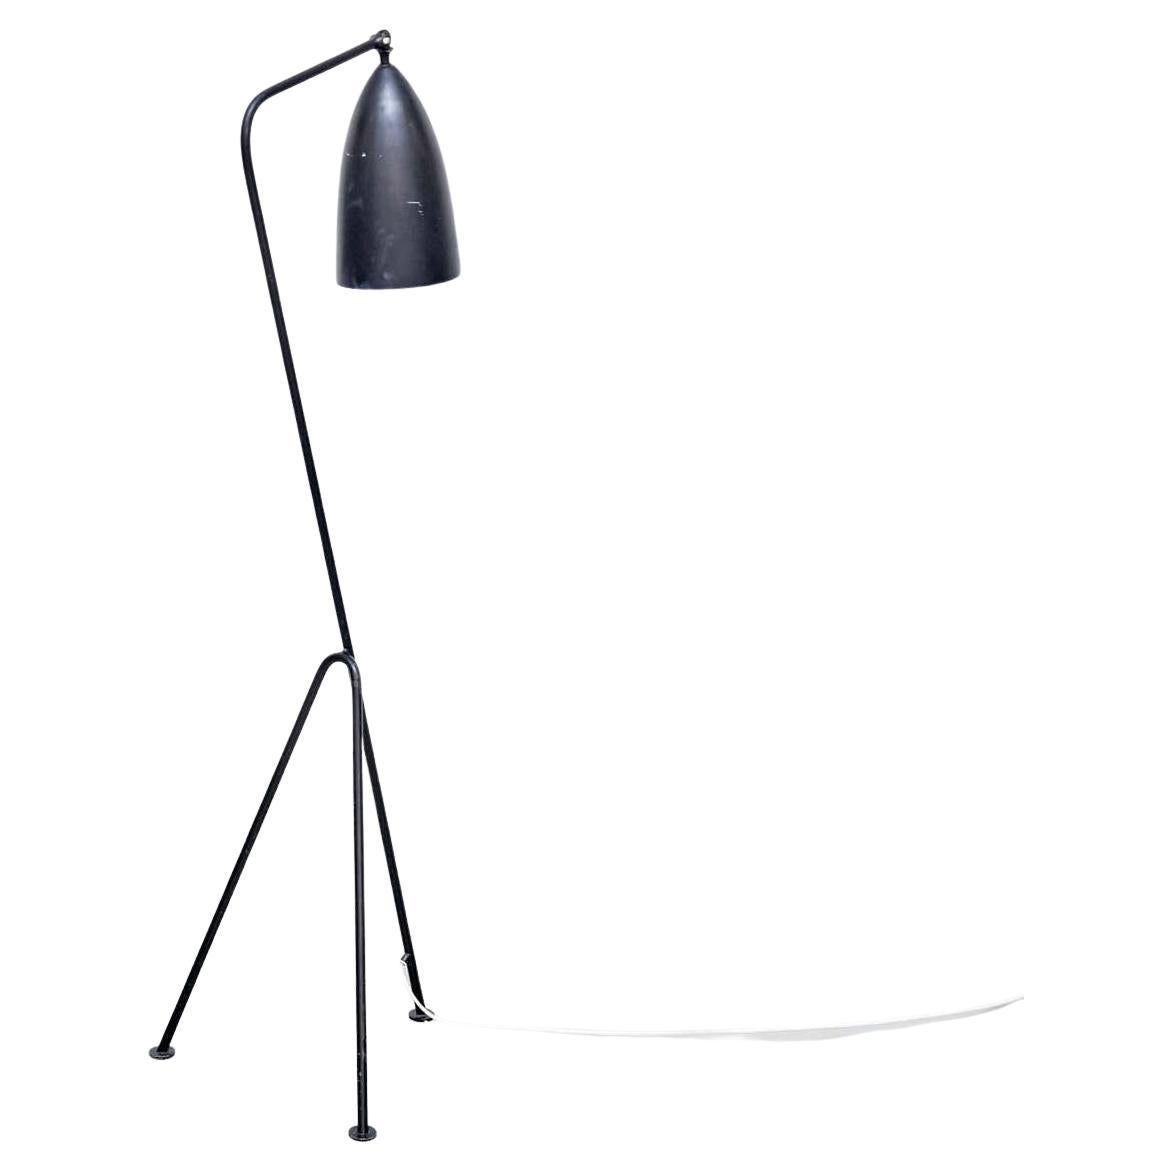 Floor lamp designed by Greta Magnusson Grossman in Sweden, circa 1947.

Embrace the timeless elegance of Mid Century Modern design with this exceptional Grasshopper floor lamp, created by renowned Swedish designer Greta Magnusson Grossman circa